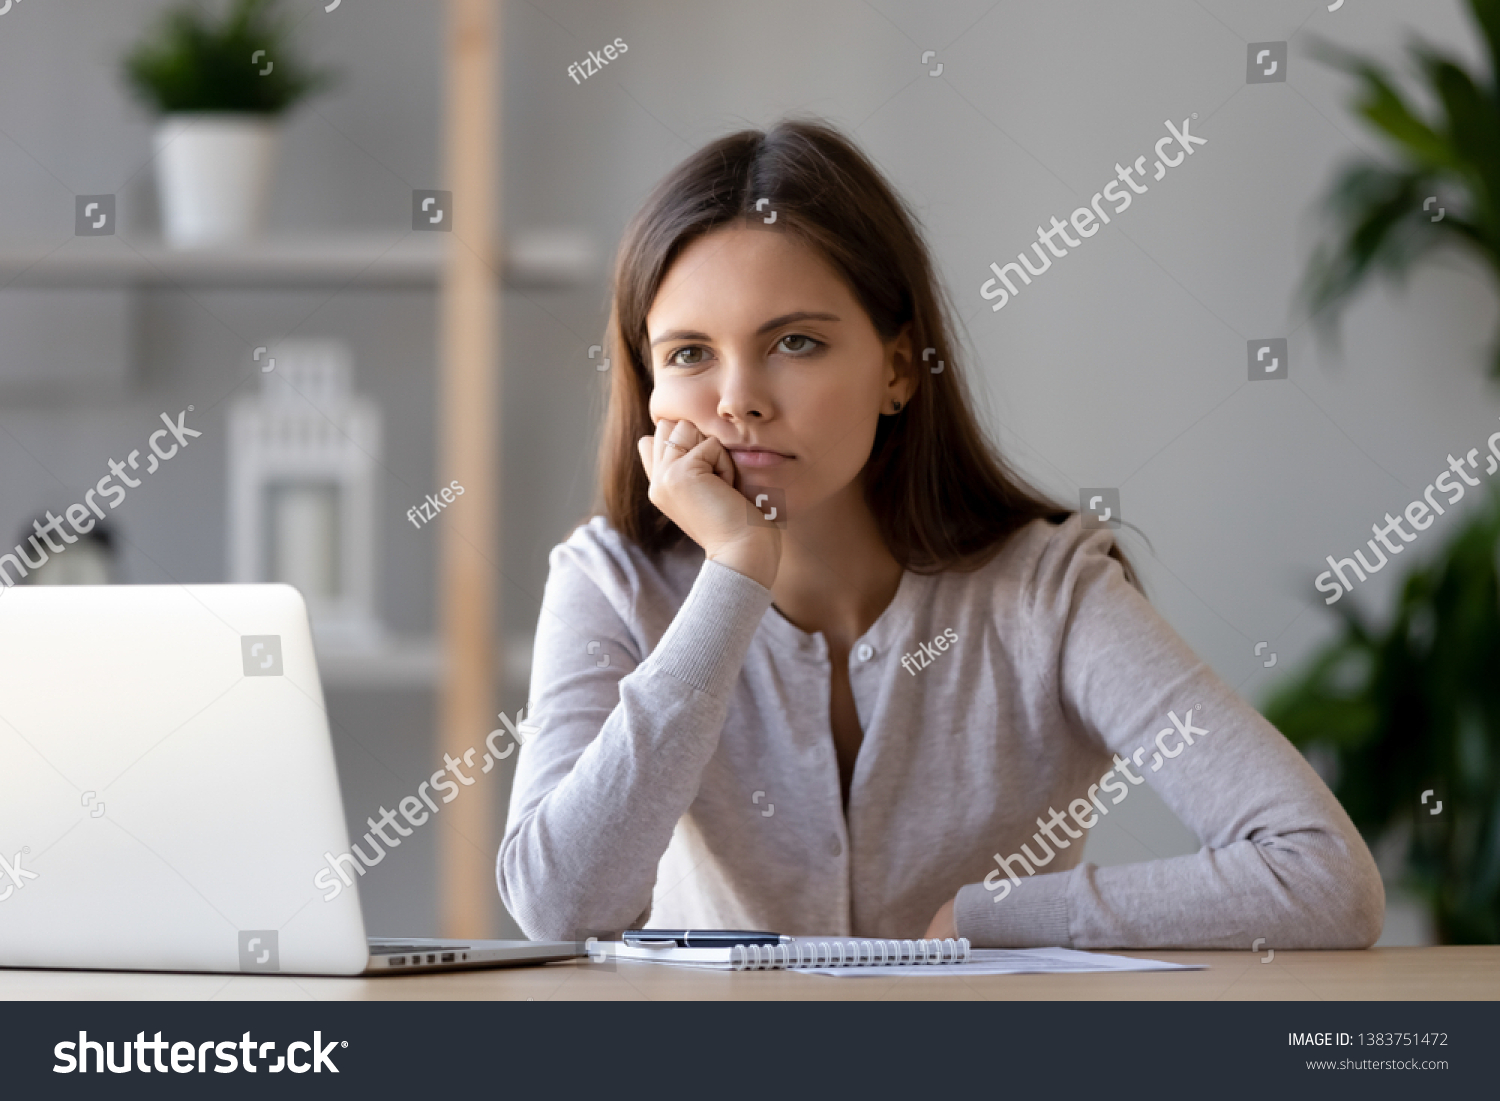 Bored young woman sit at home office table look in distance unable to work at laptop, exhausted girl student feel unmotivated unwilling to study, distracted taking break. Dull monotonous job concept #1383751472